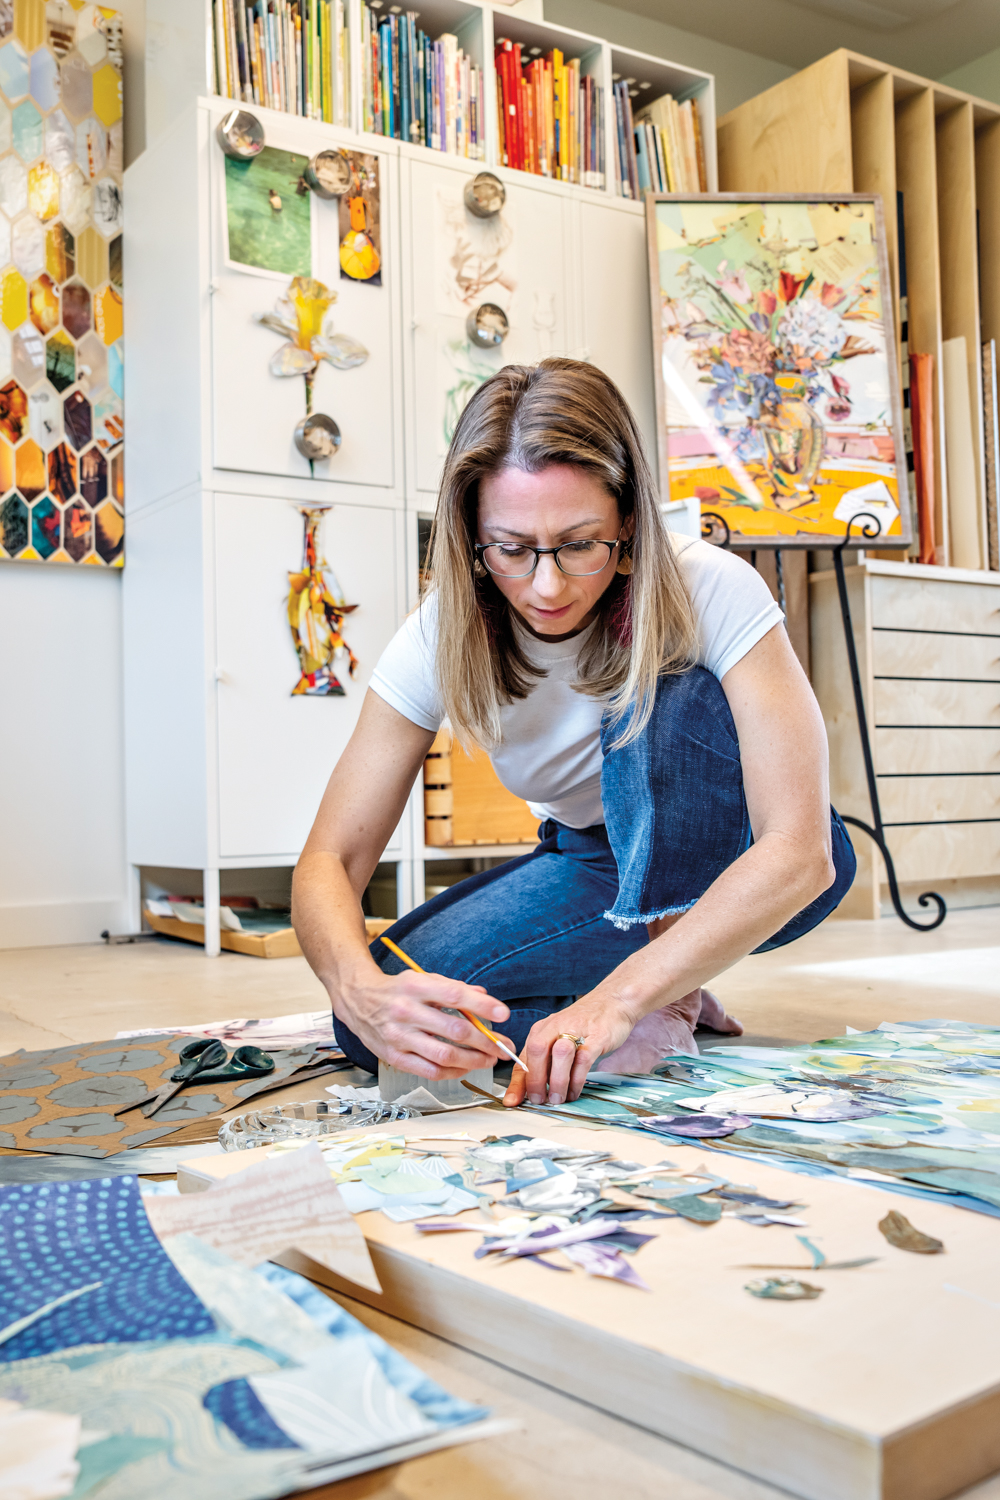 artist laurie carswell creating a collage on the floor